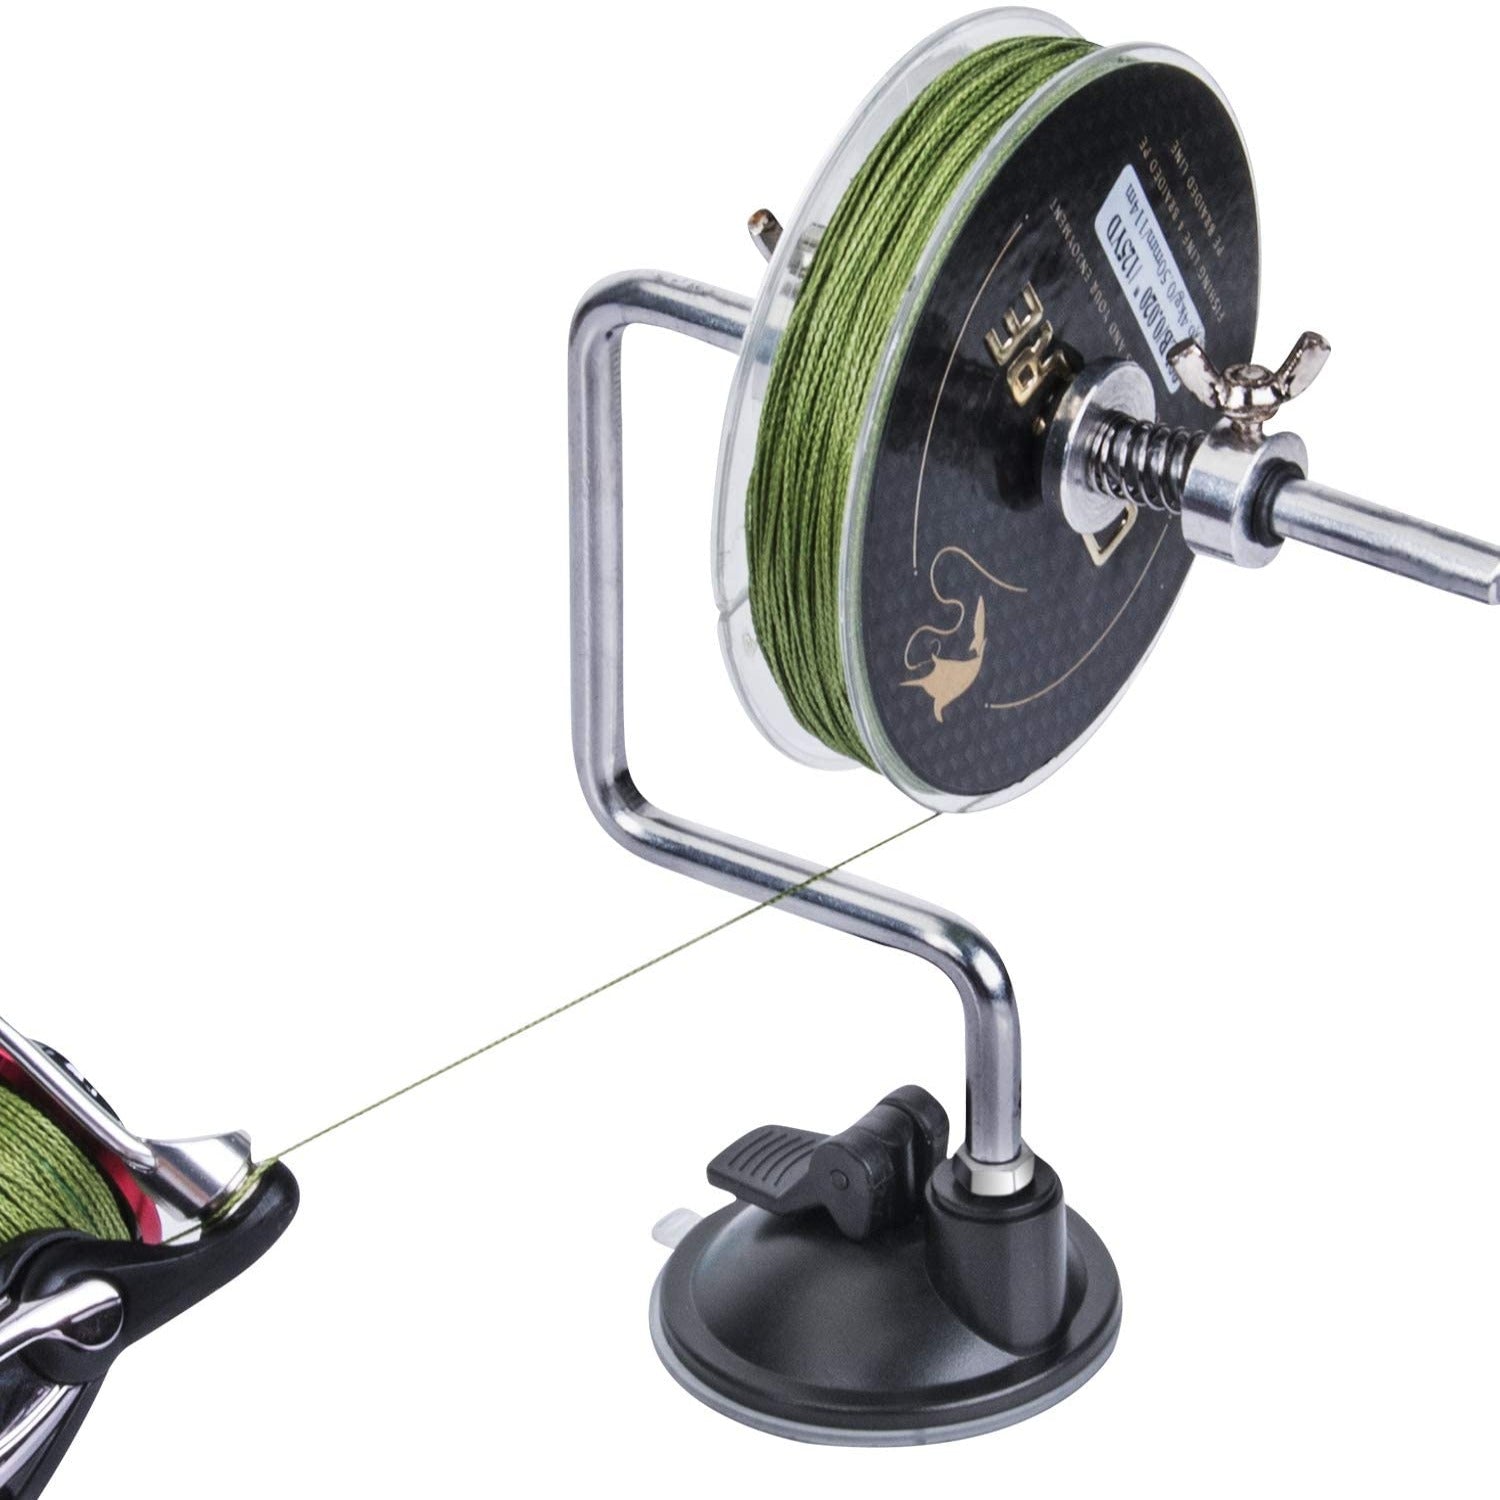 Goture Fishing Line Spooler with Unwinding Function, No Twist Fishing Reel  Spooler with Handhold/Suction Cup/Clamps, Adjustable Fishing Line Winder